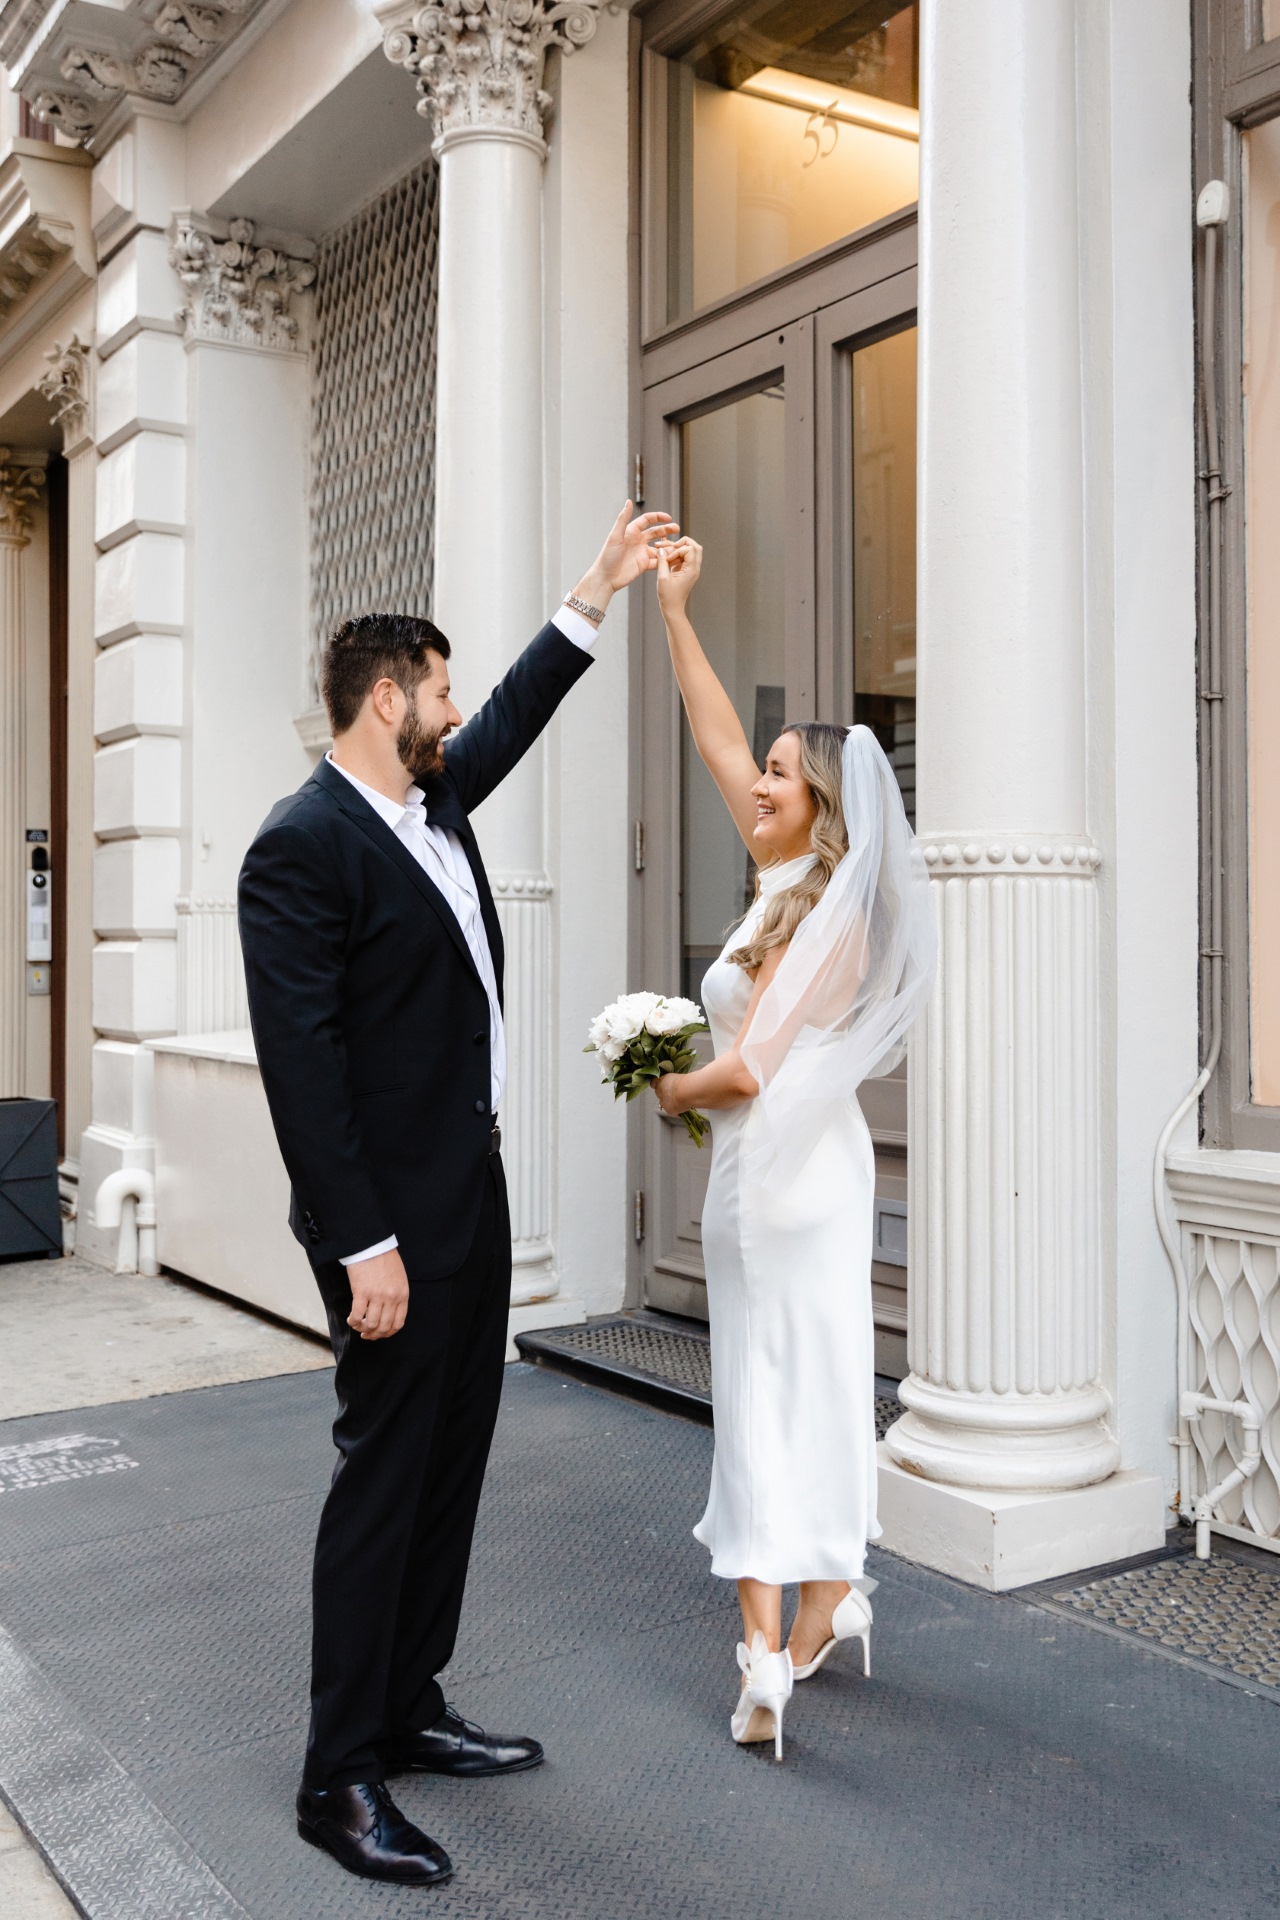 Engagement photos in soho nyc (9)